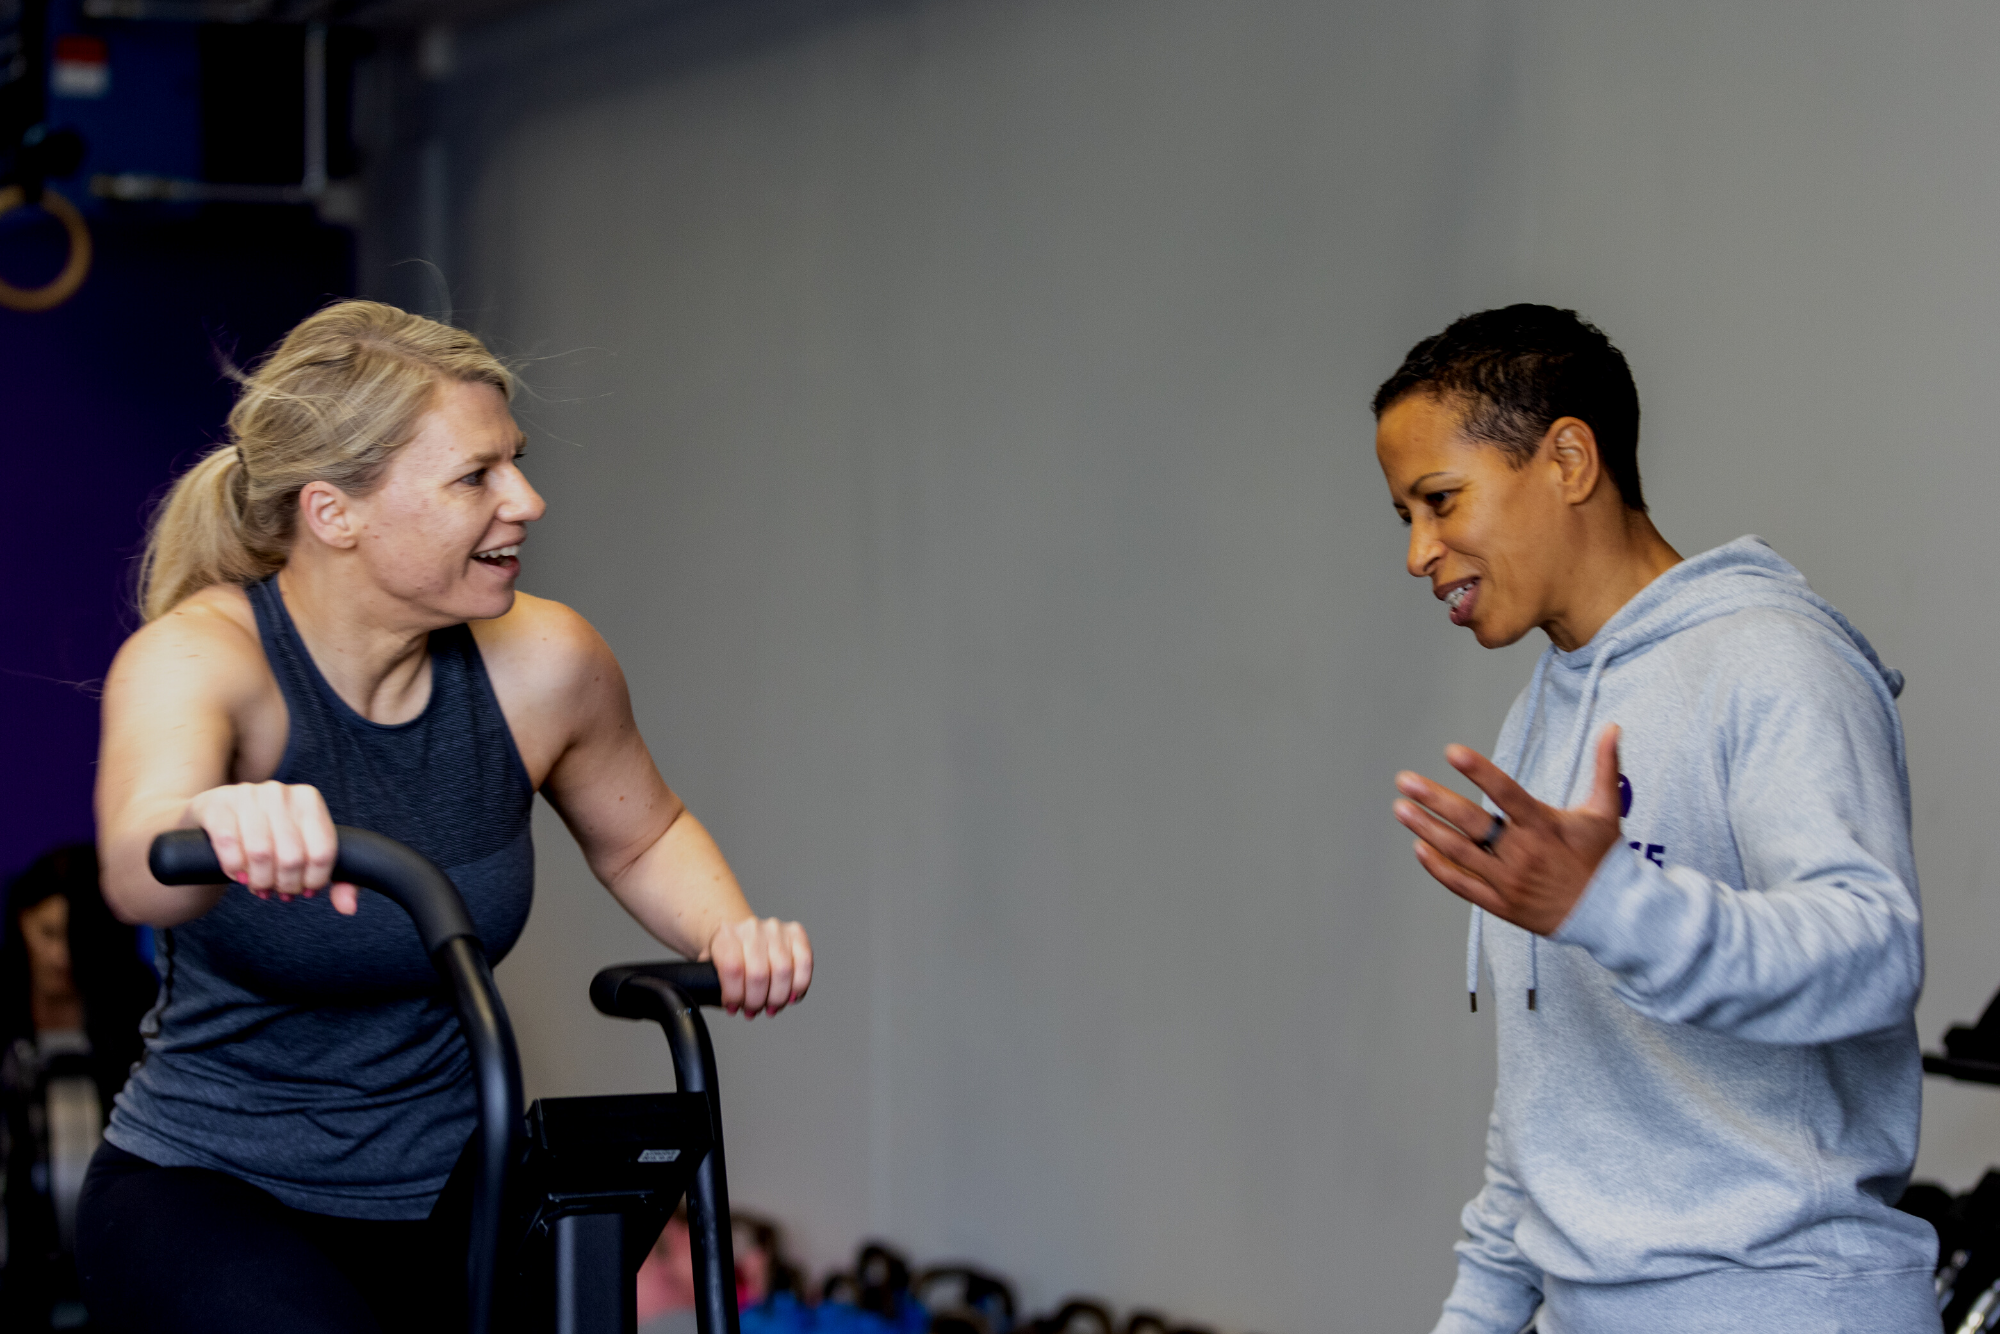 CrossFit L2 Trainer Tina with client